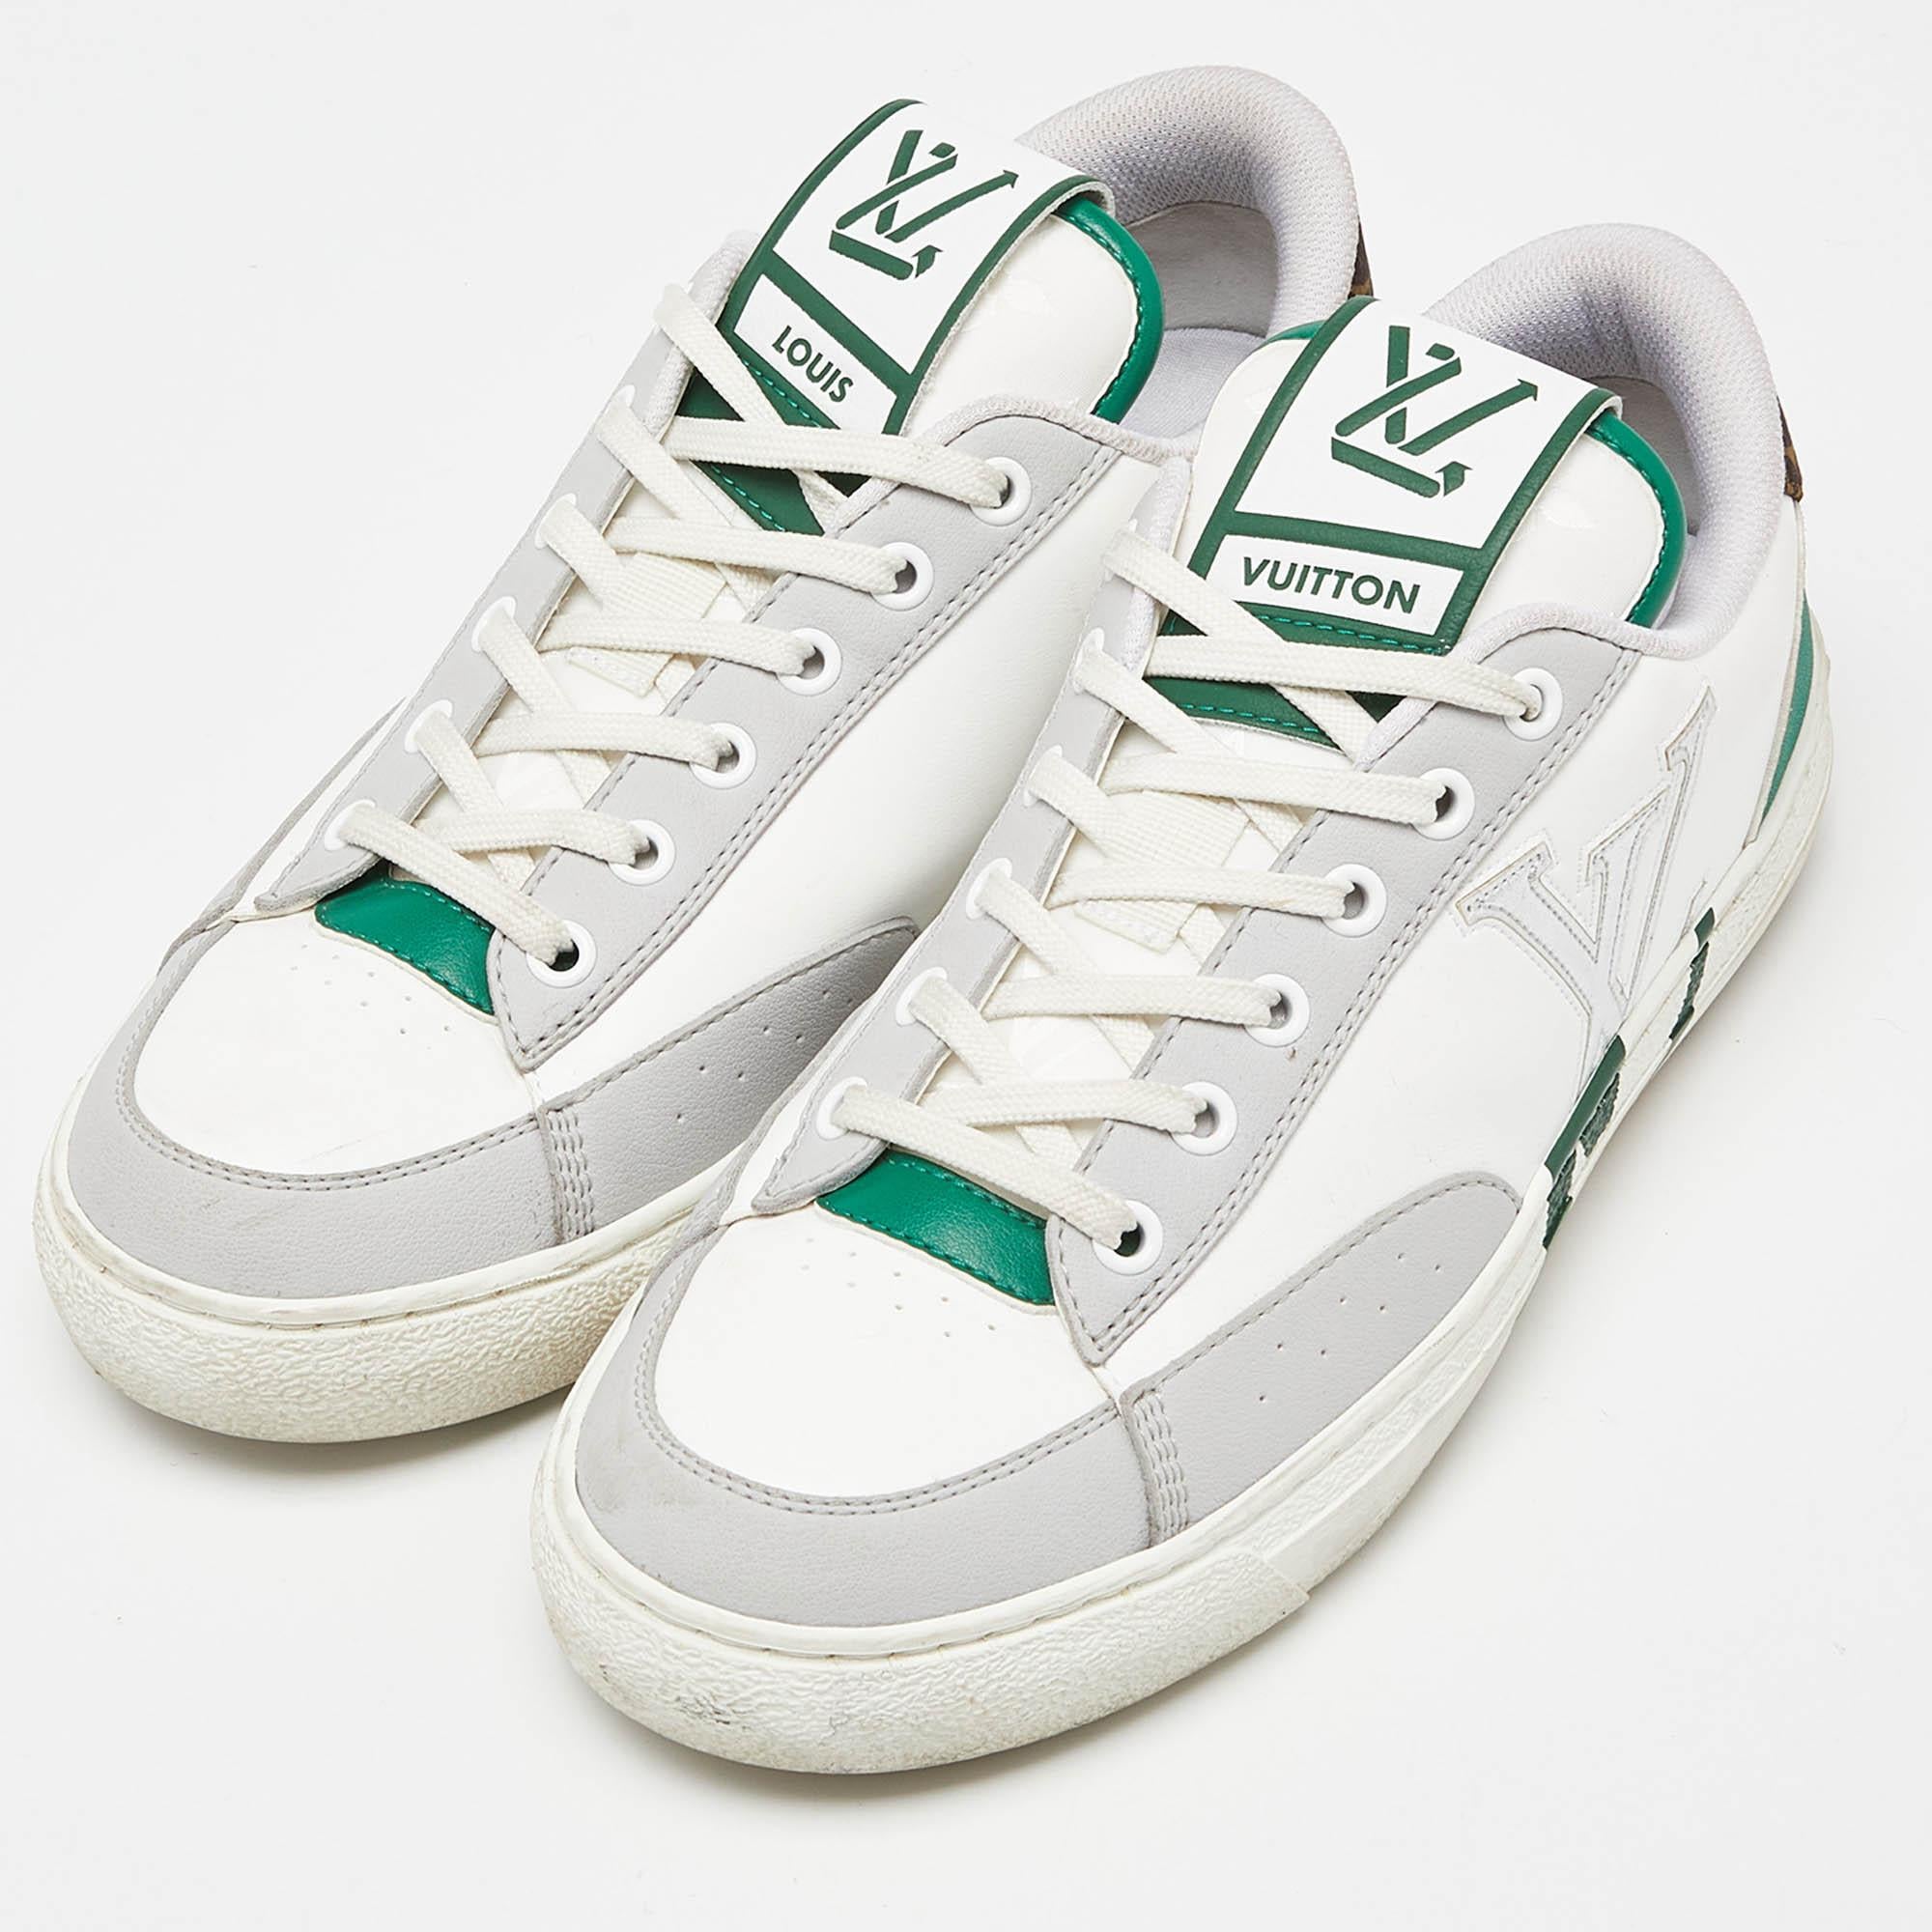 Louis Vuitton White/Green Leather Charlie Sneakers Size 39 1